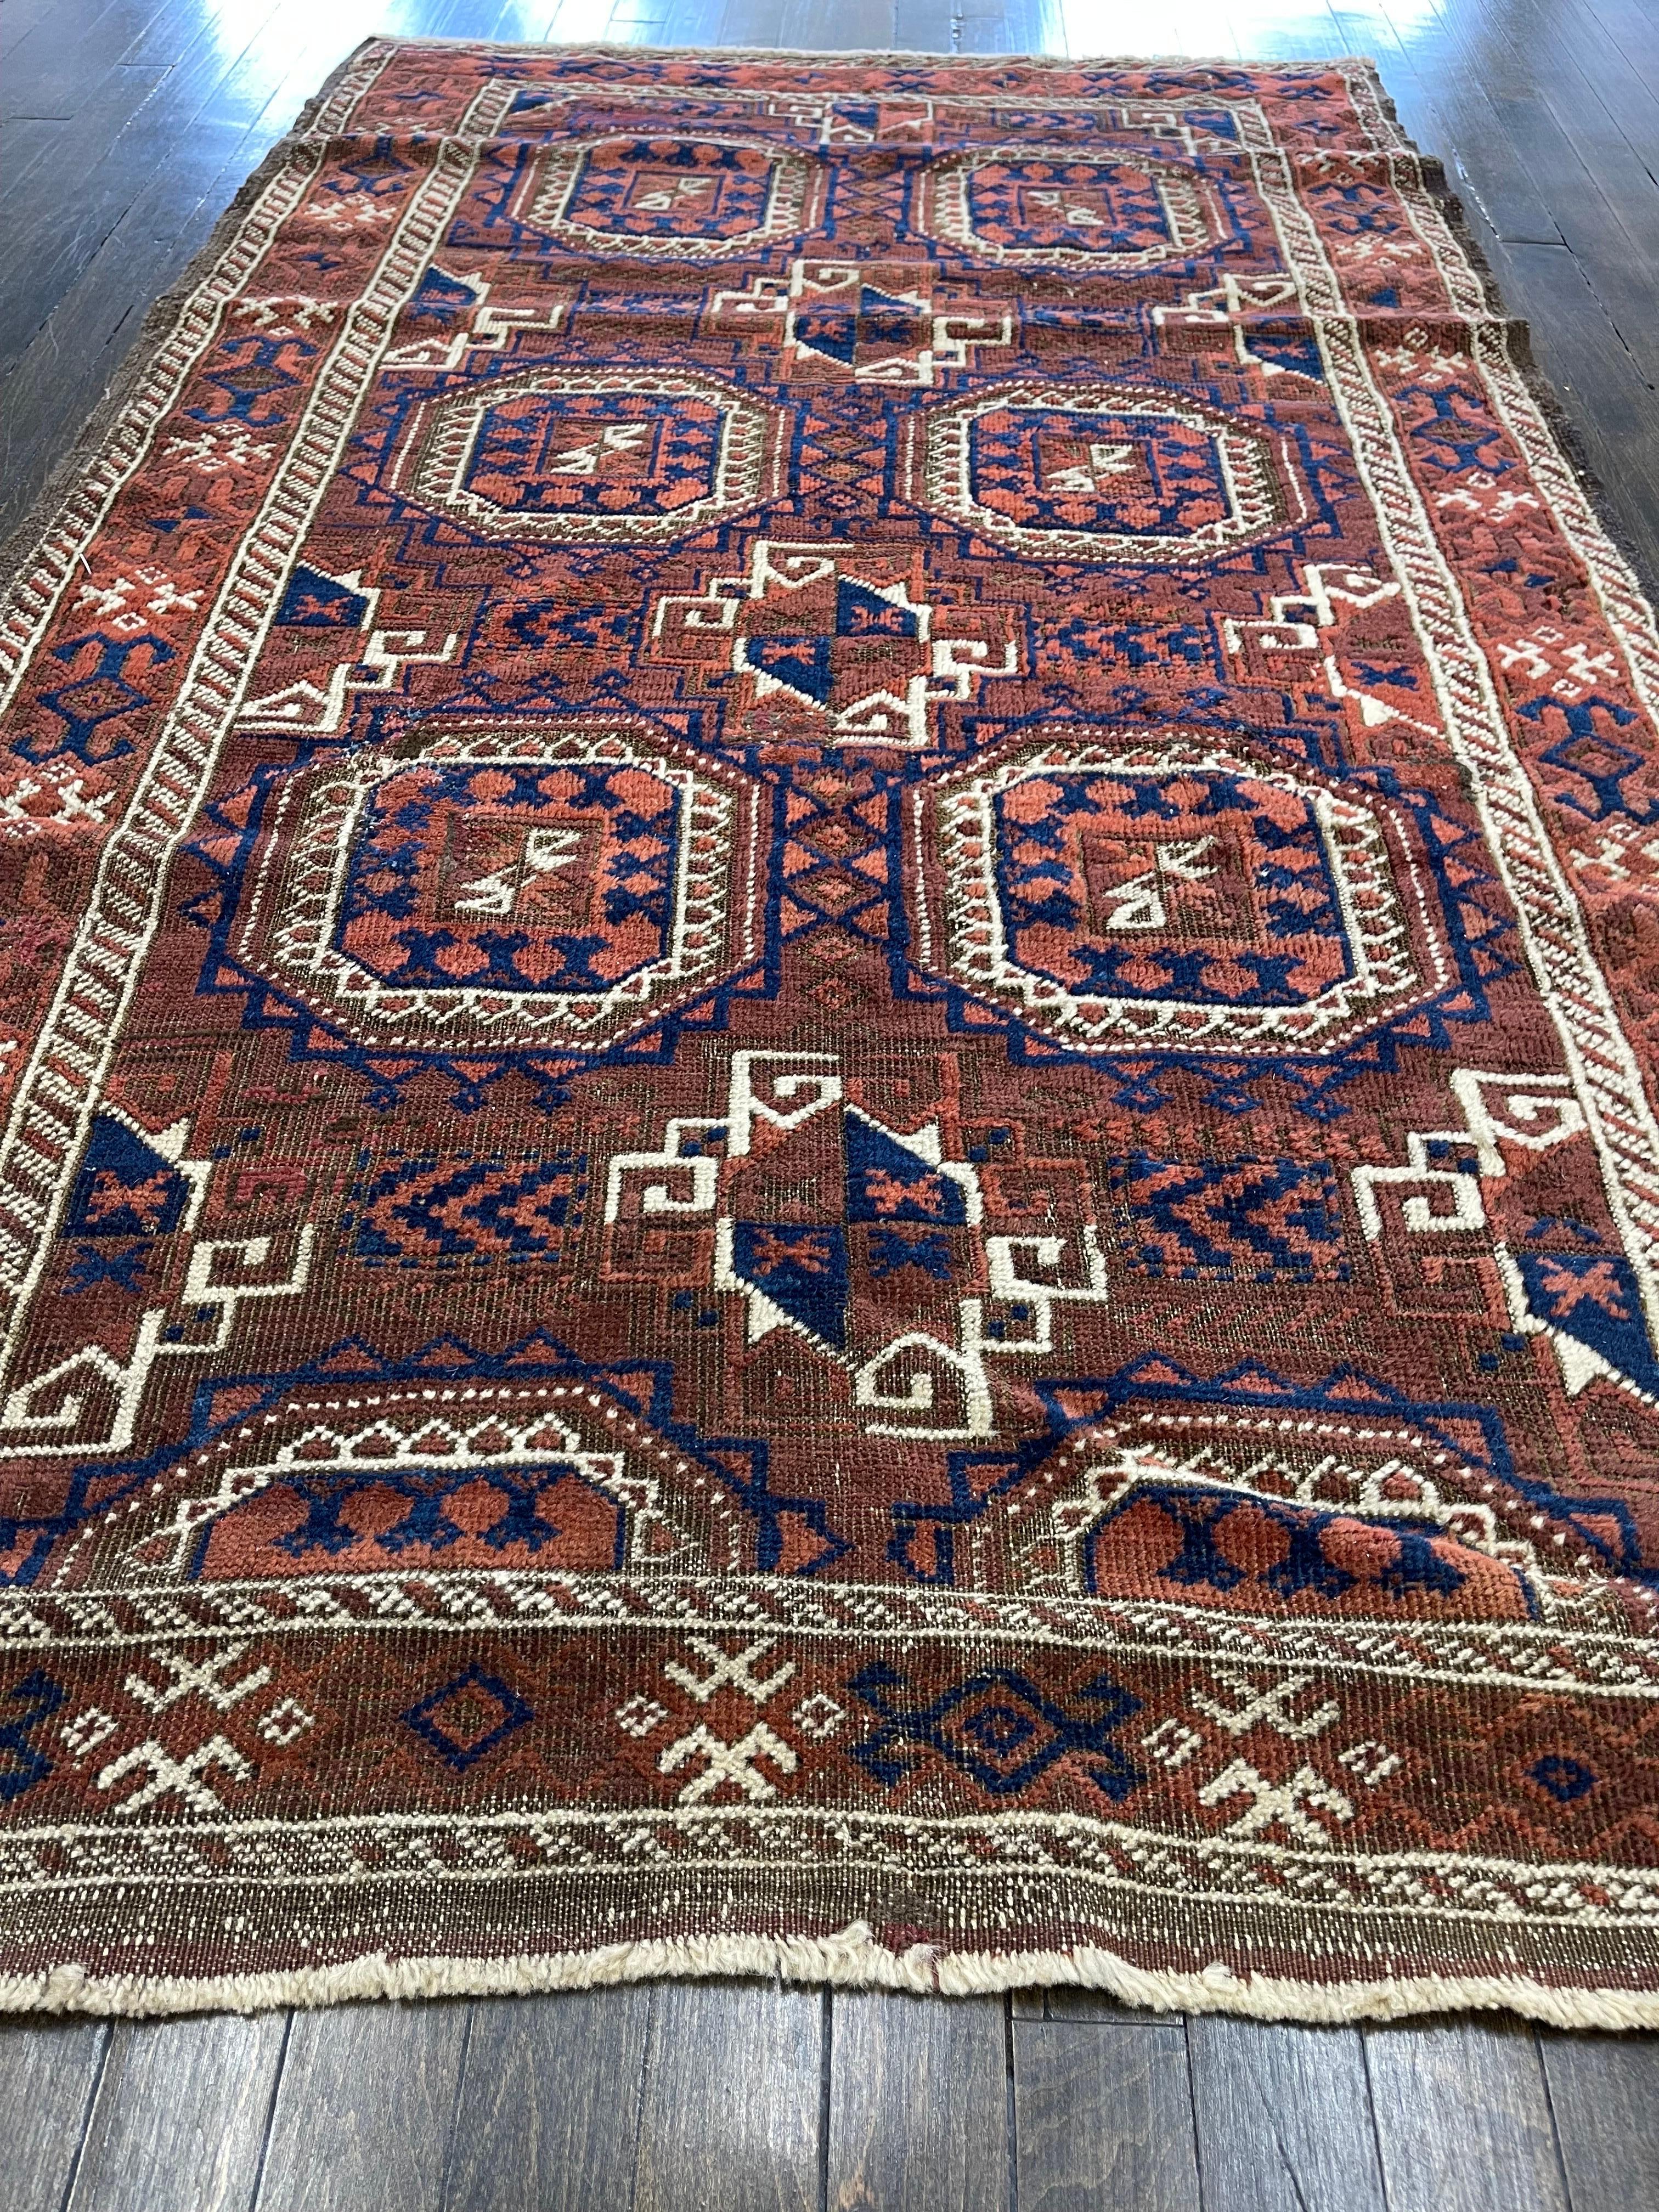 Having a rich brown field and incorporating electric blue balanced with lighter shades of brown and vivid ivory colors, this turn of the century Persian Baluch rug is decorated with six panel Gul resembling 